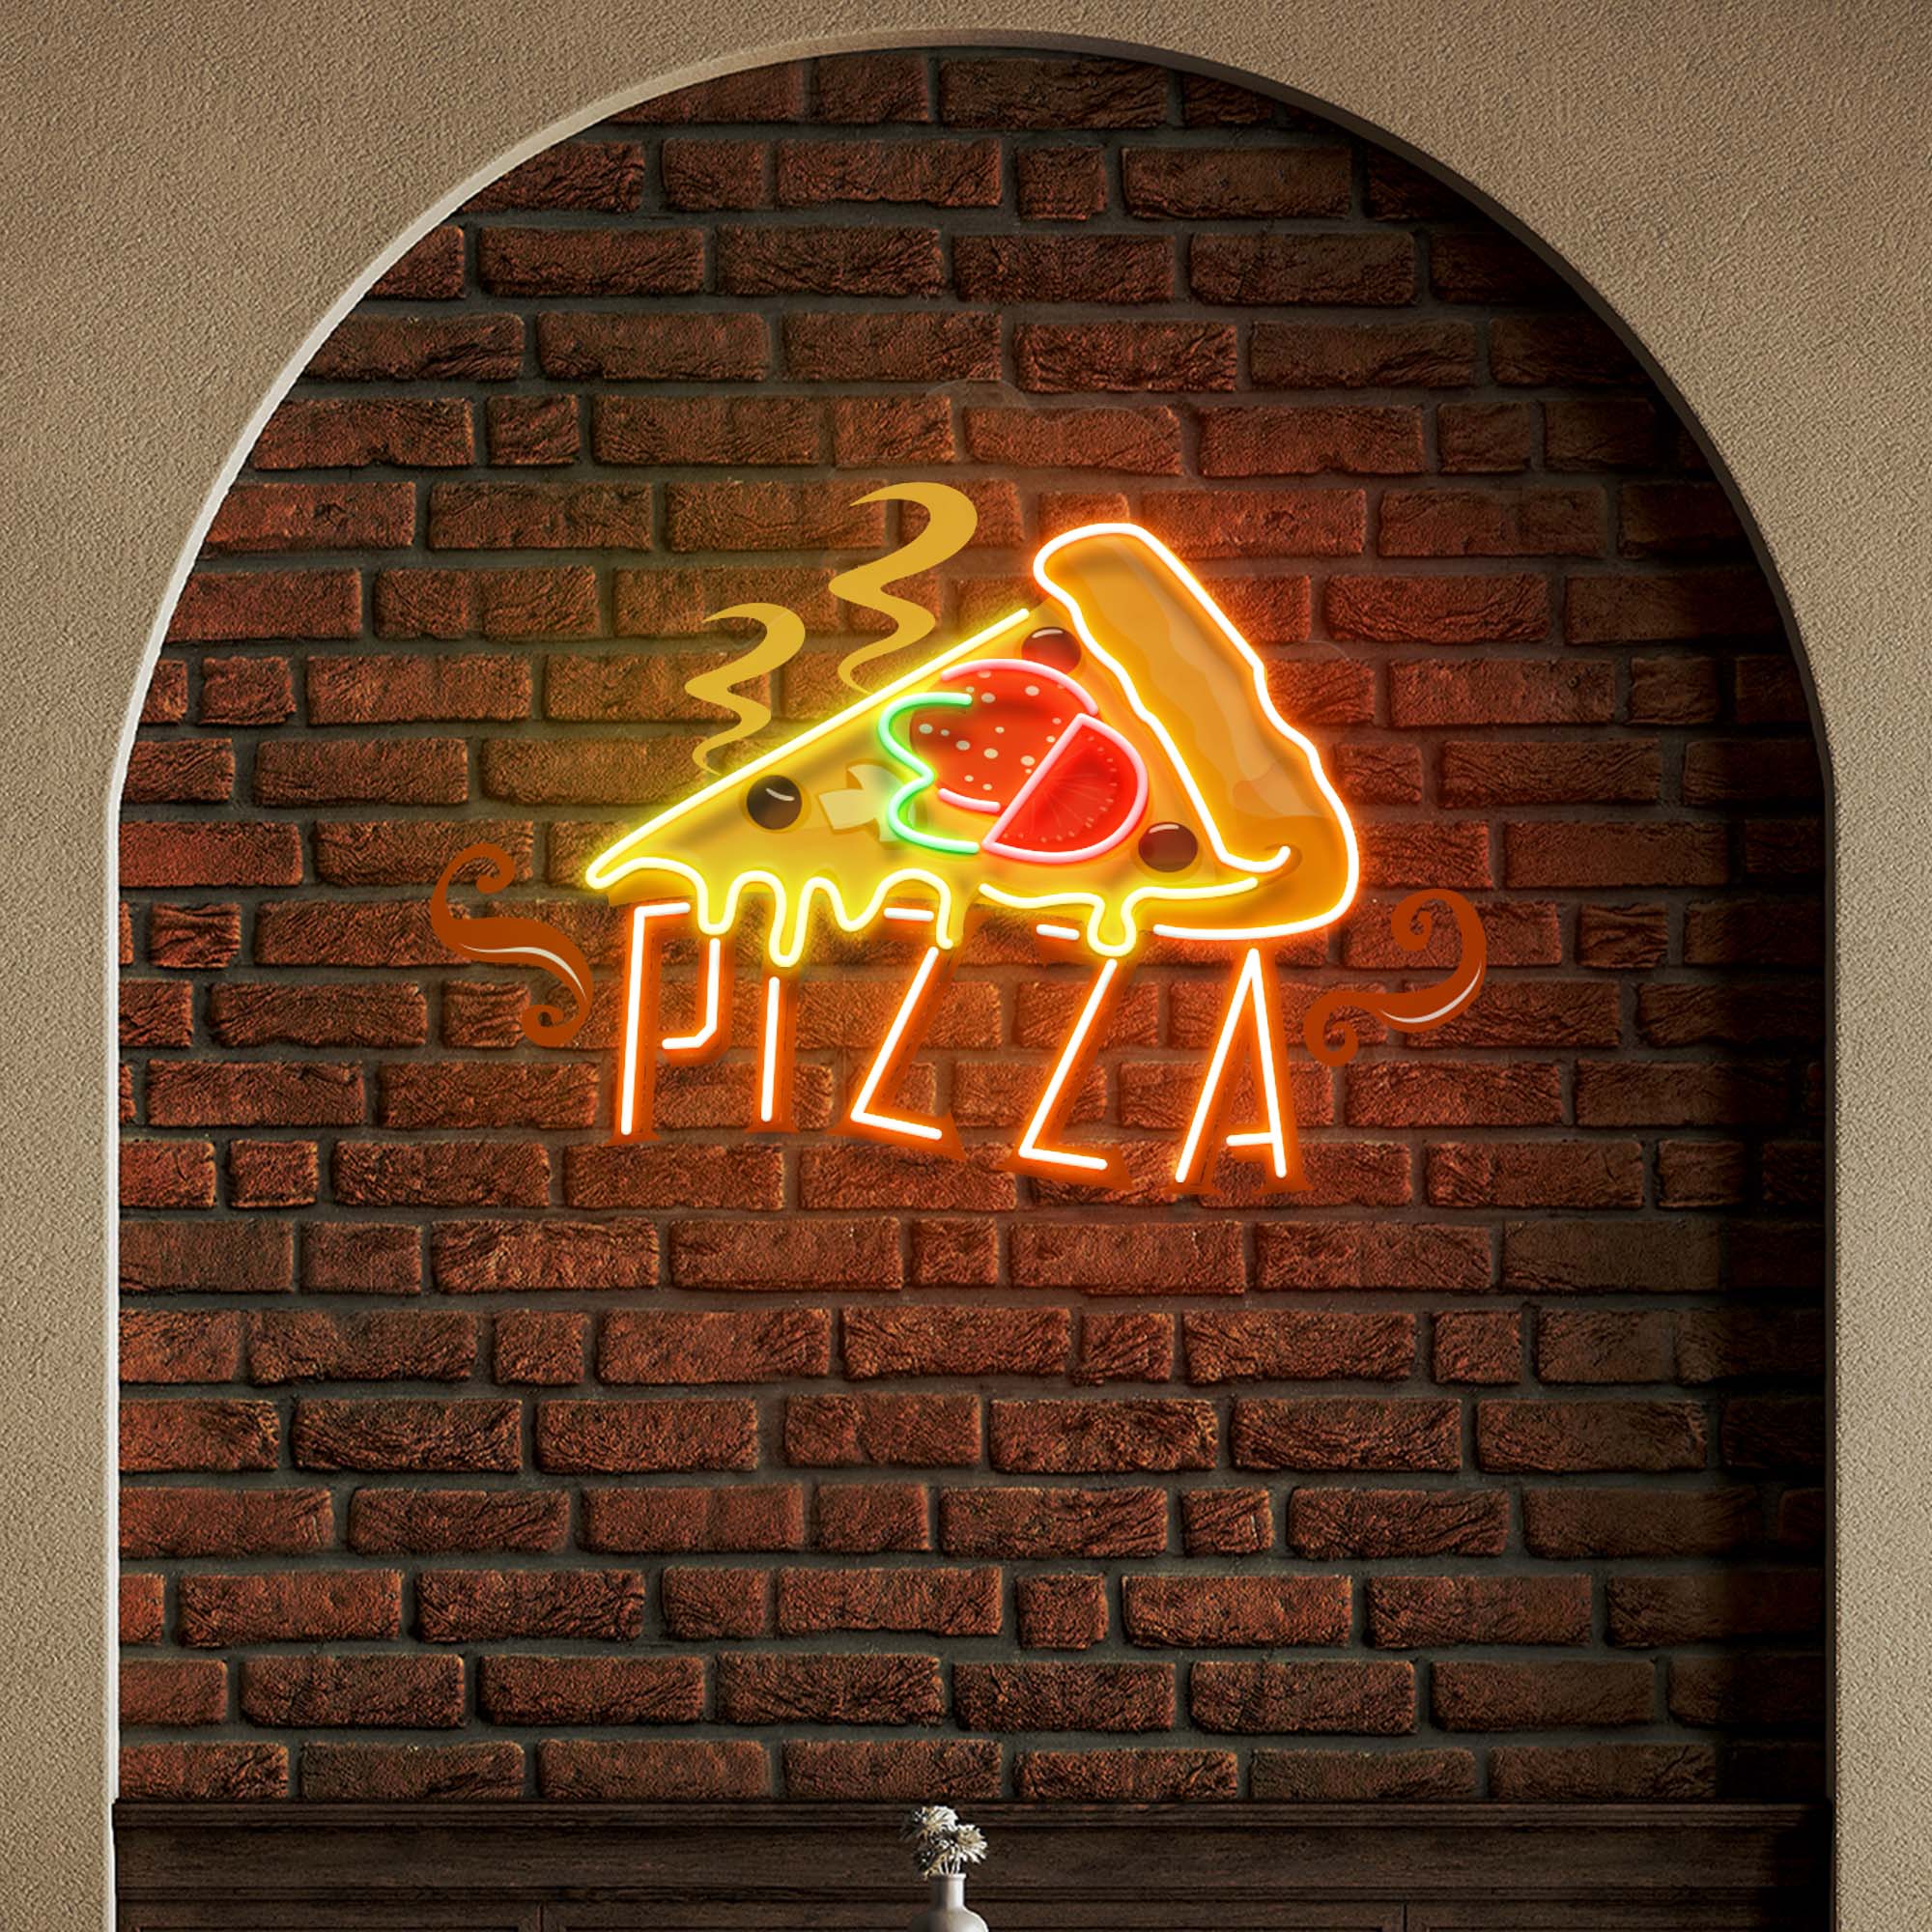 Custom Name Fast Food Restaurant With Pizza Led Neon Sign Light - Neonbir